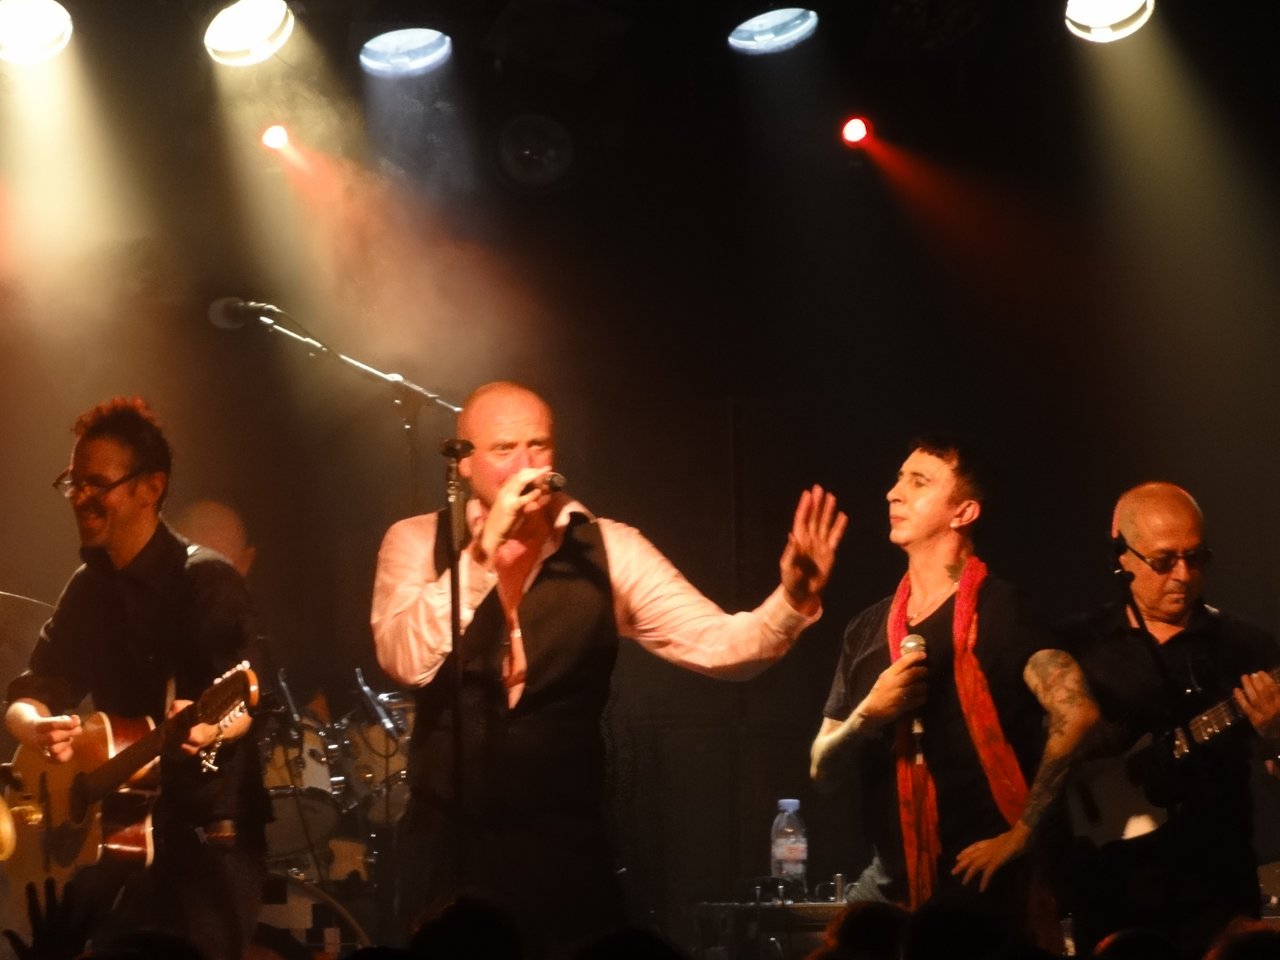 29 Holy Holy and Marc Almond at the Garage.jpg